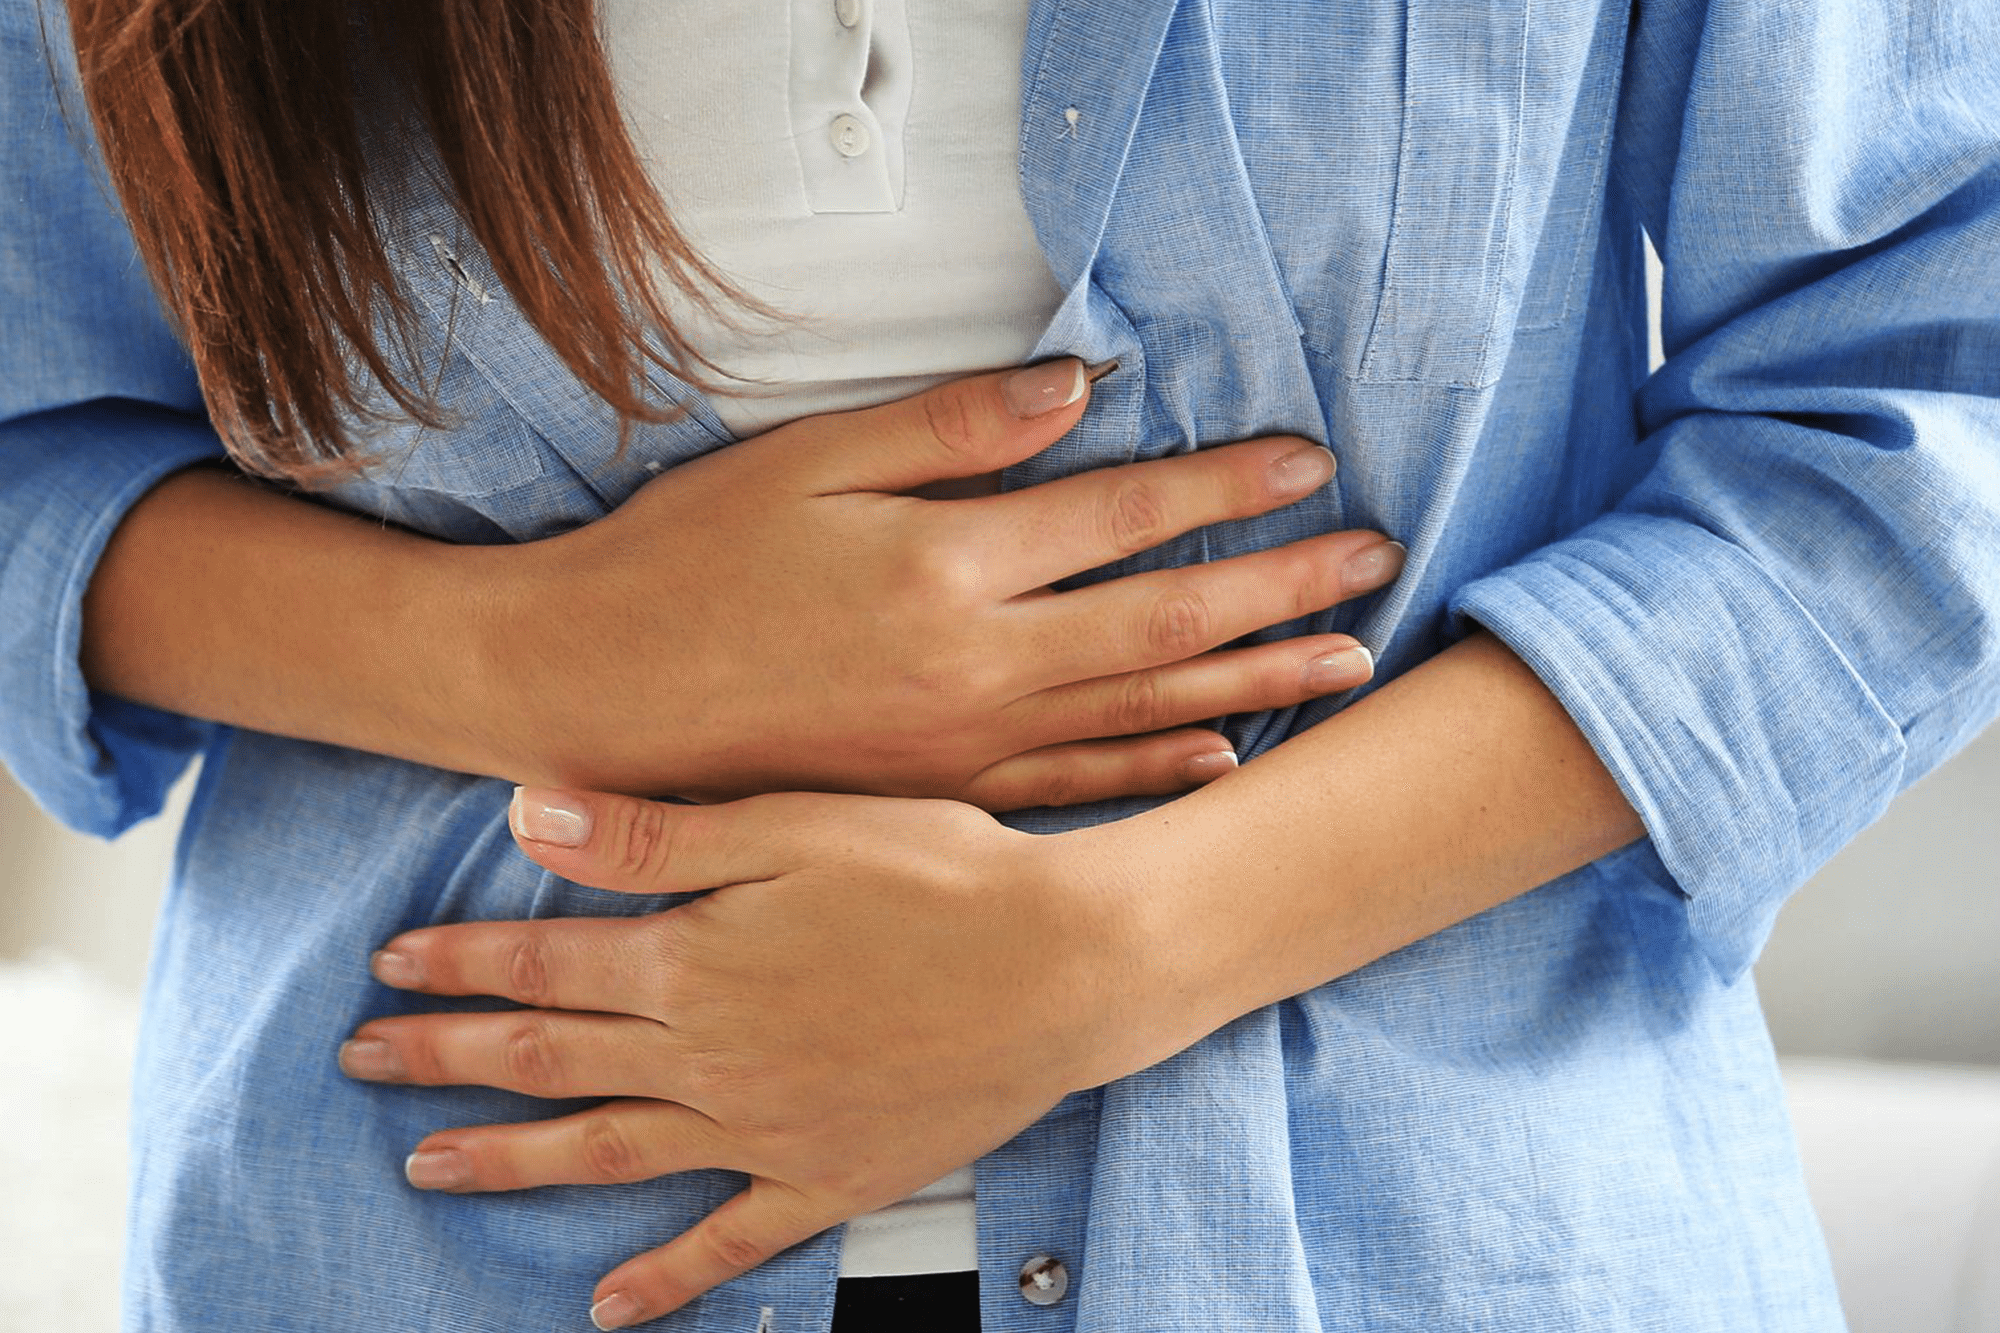 How to manage Endometriosis, a growing problem among young women